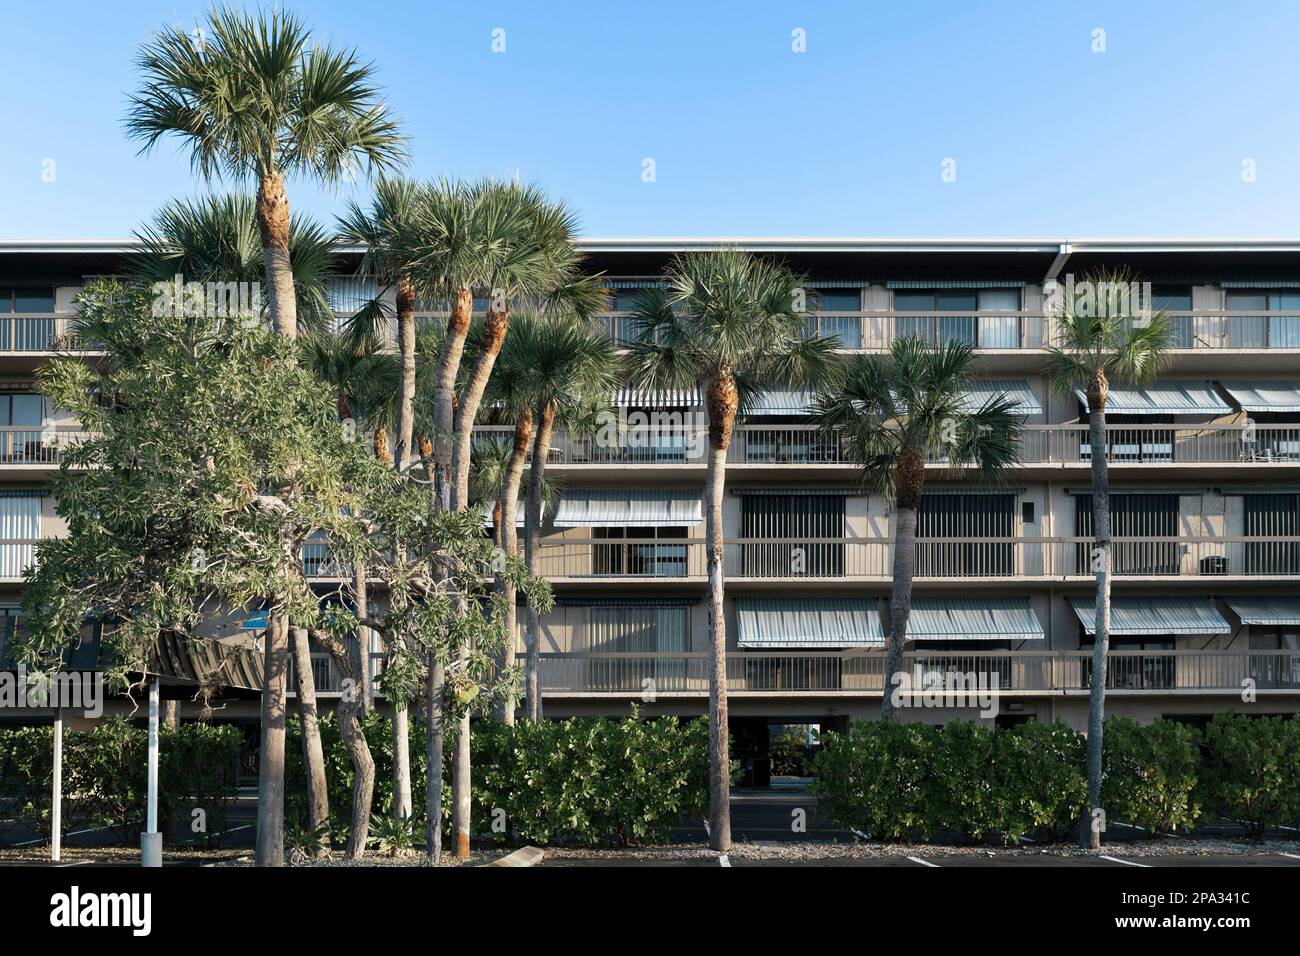 Apartment building in tropical location. Stock Photo